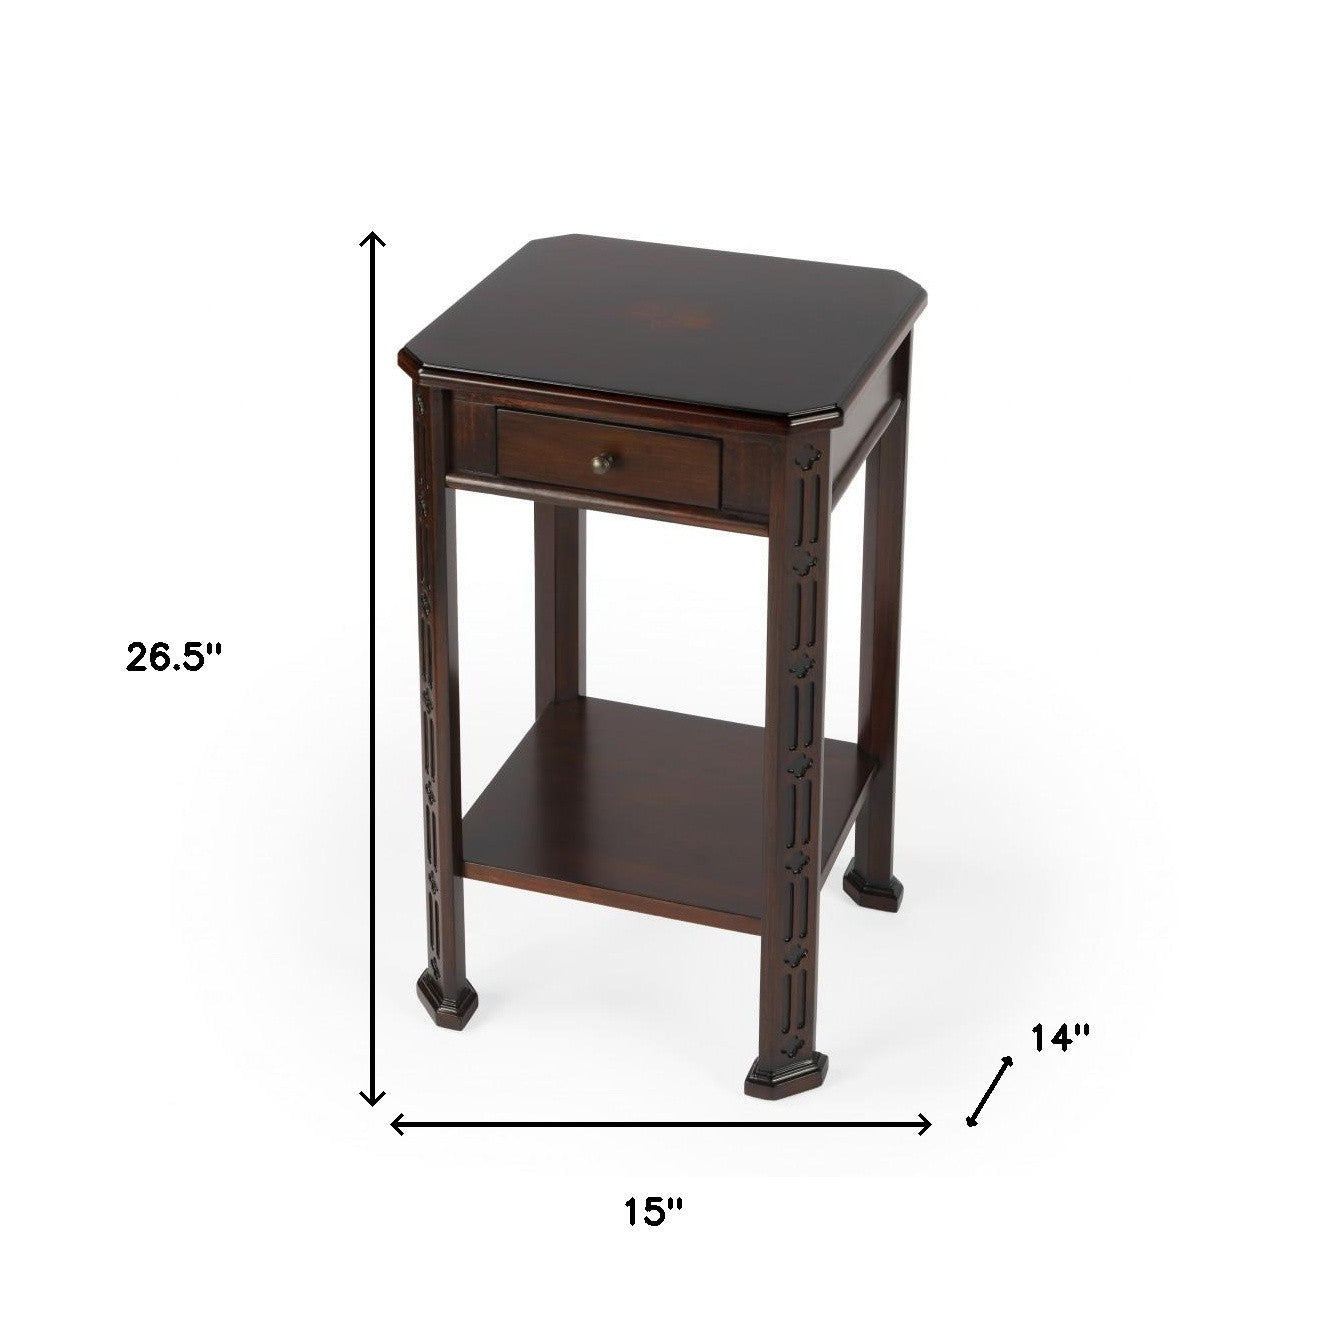 27" Dark Brown And Cherry Manufactured Wood Rectangular End Table With Drawer And Shelf